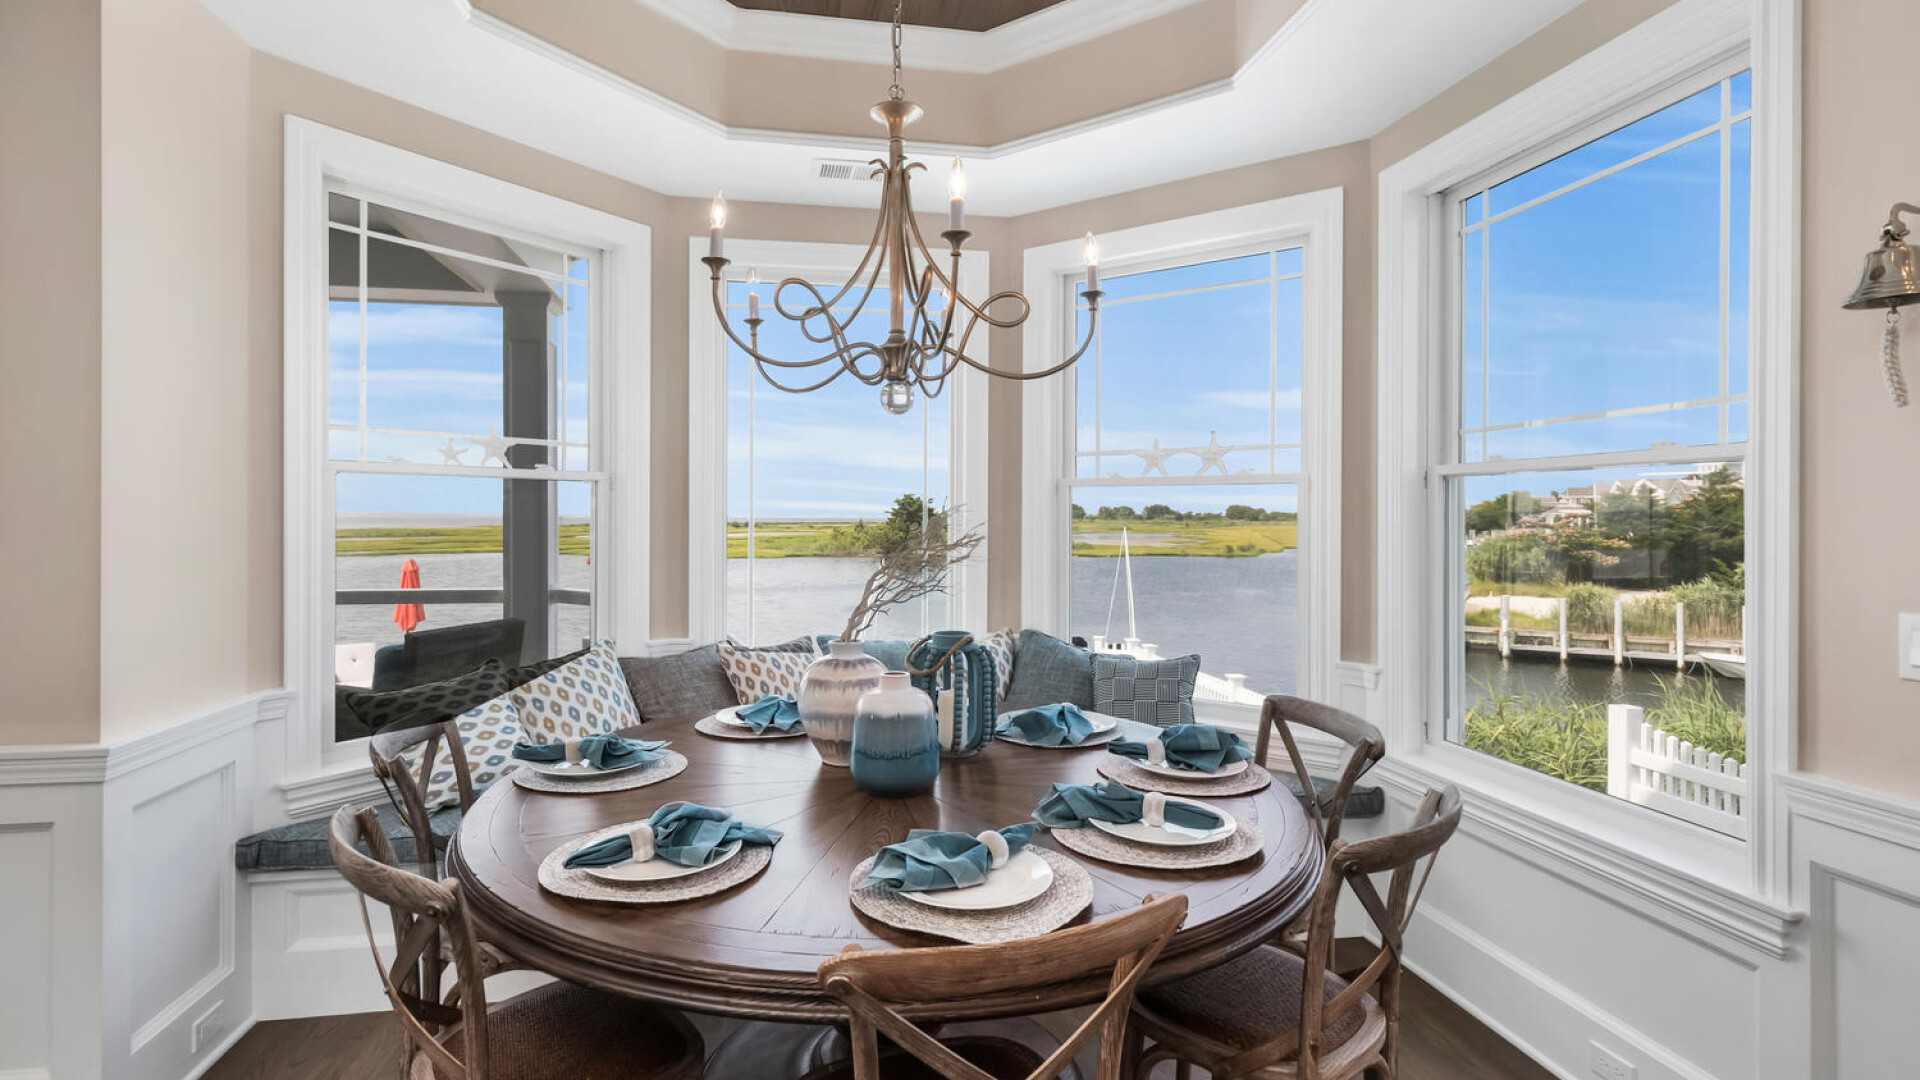 Light and bright breakfast nook overlooking the water, Long Beach Island NJ